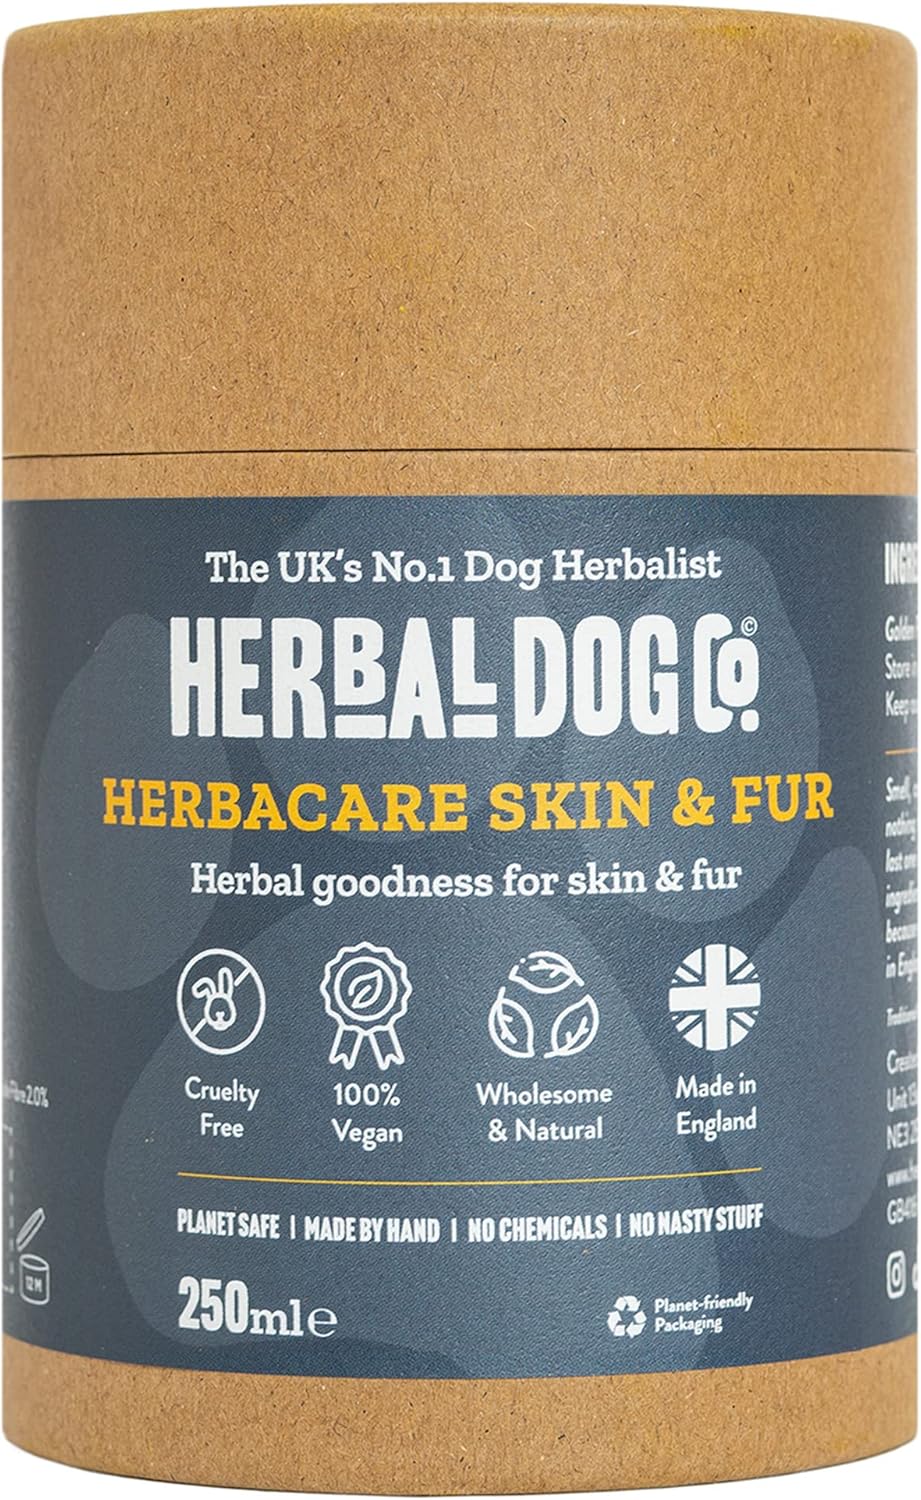 Herbal Dog Co Skin & Fur Food Supplement for Dogs & Puppies, 250ml - Dog Supplements for Skin & Coat - Dog Multivitamin - All-Natural, Vegan, Made in UK?5060673050585